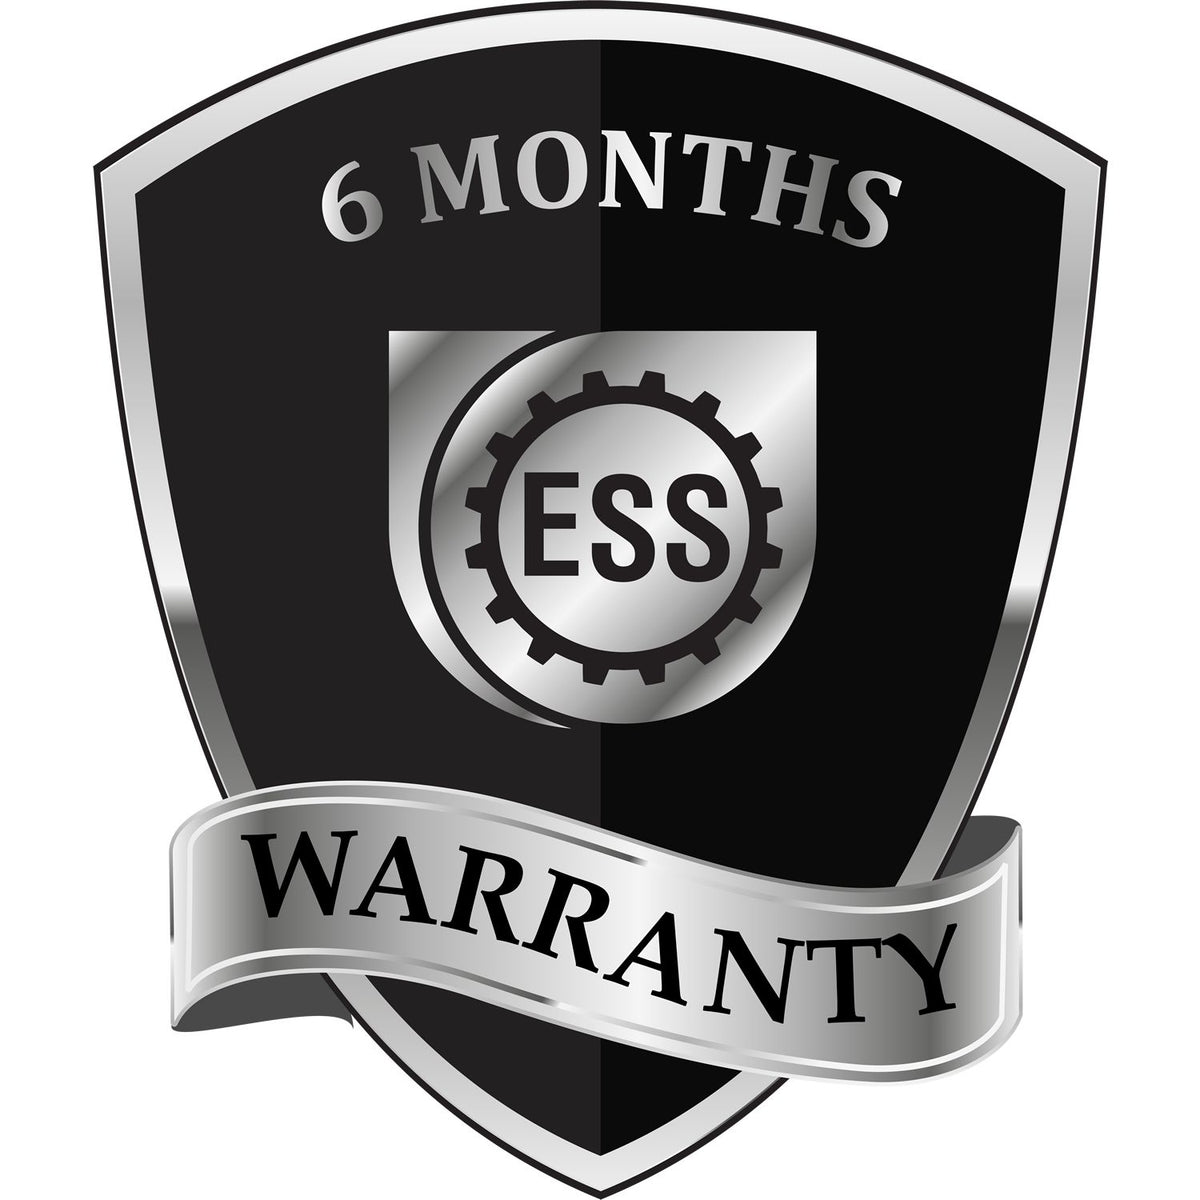 A badge or emblem showing a warranty icon for the Self-Inking Virginia PE Stamp